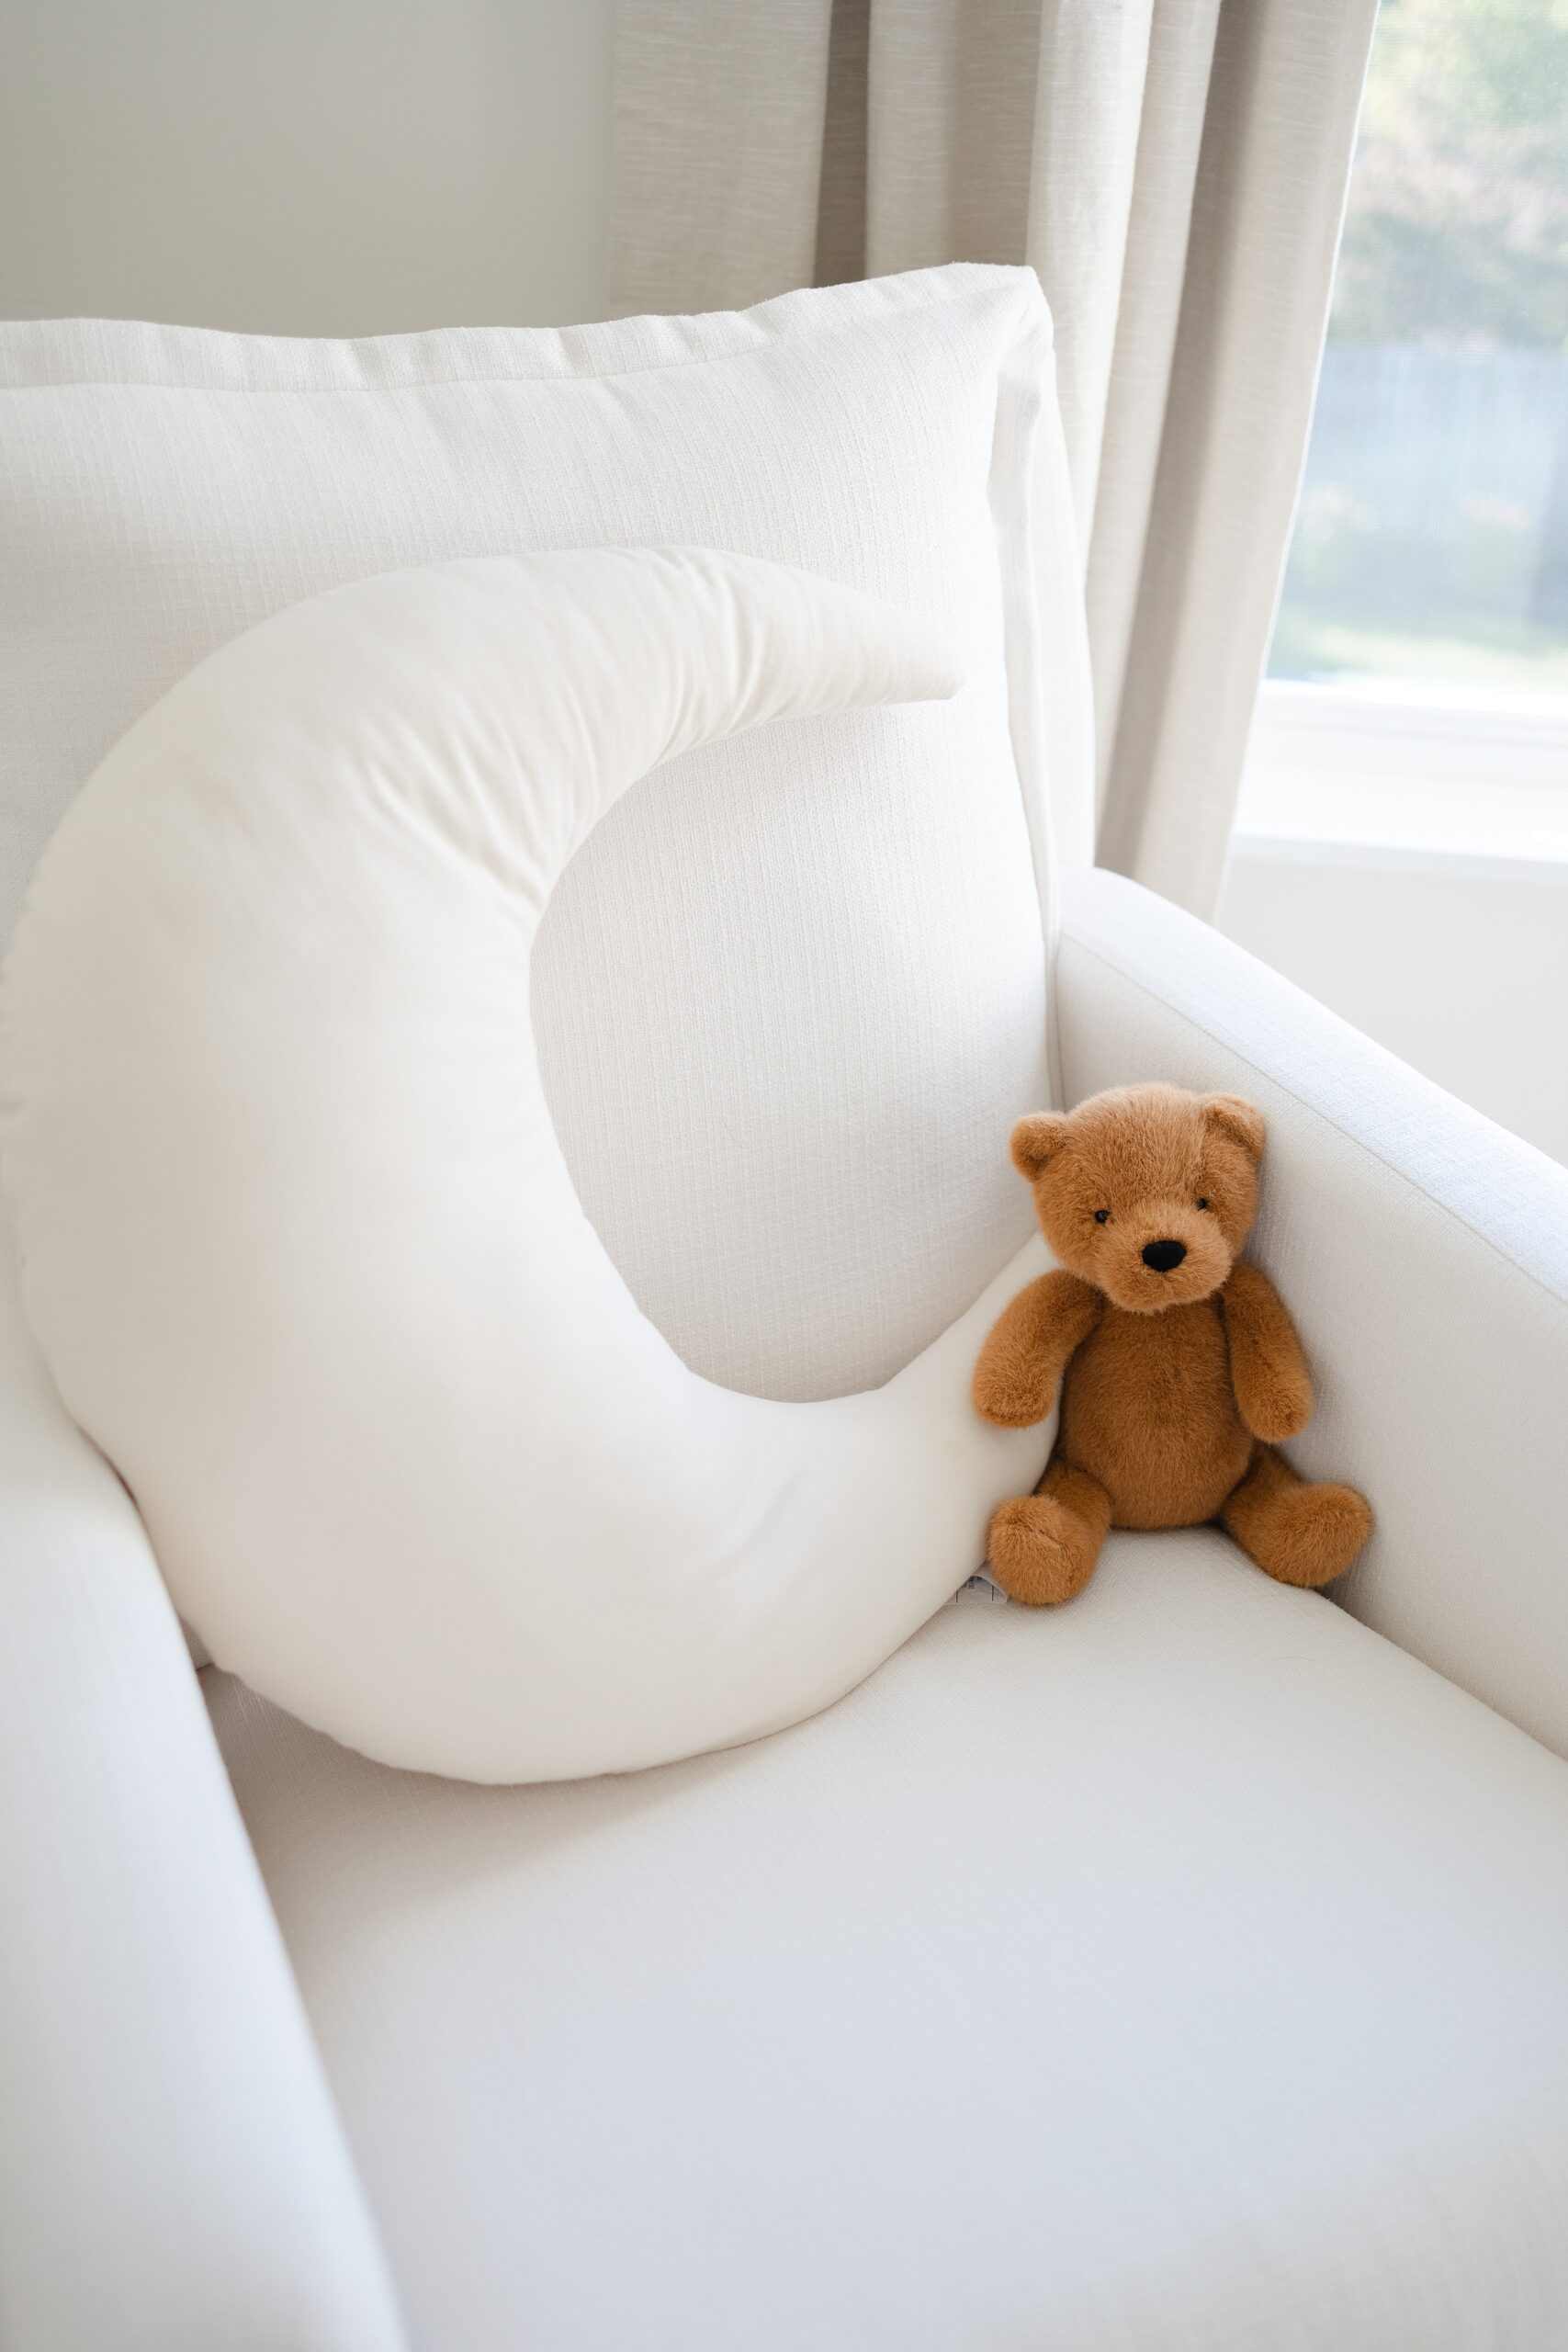 Details of a nursing chair with a moon pillow and stuffed bear